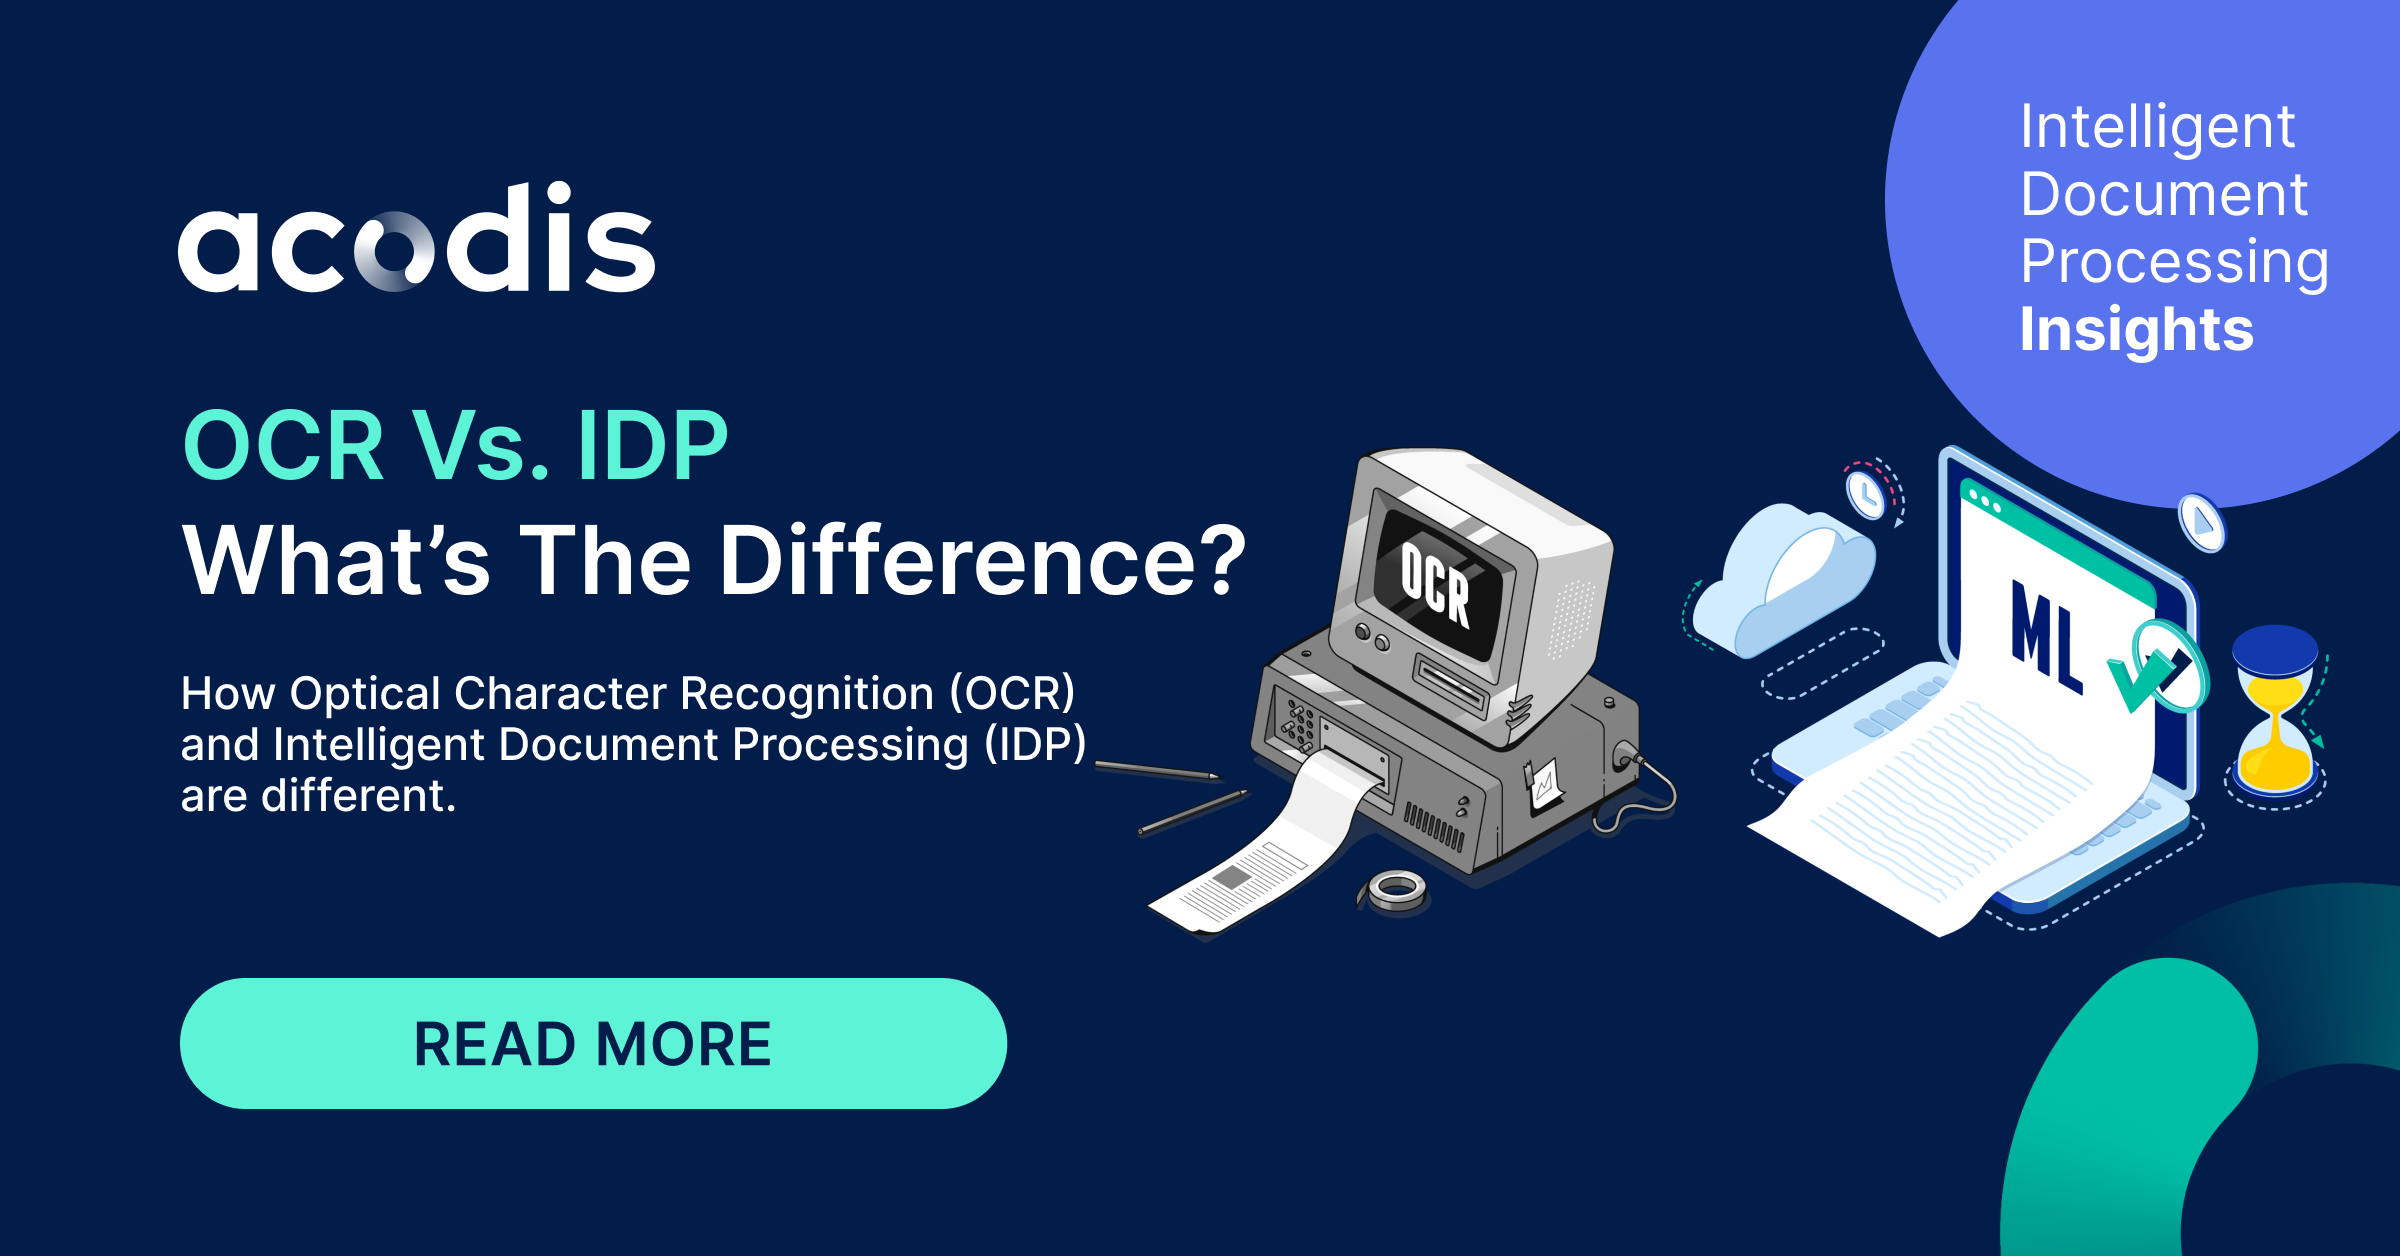 OCR vs IDP (Intelligent Document Processing): what's the difference?